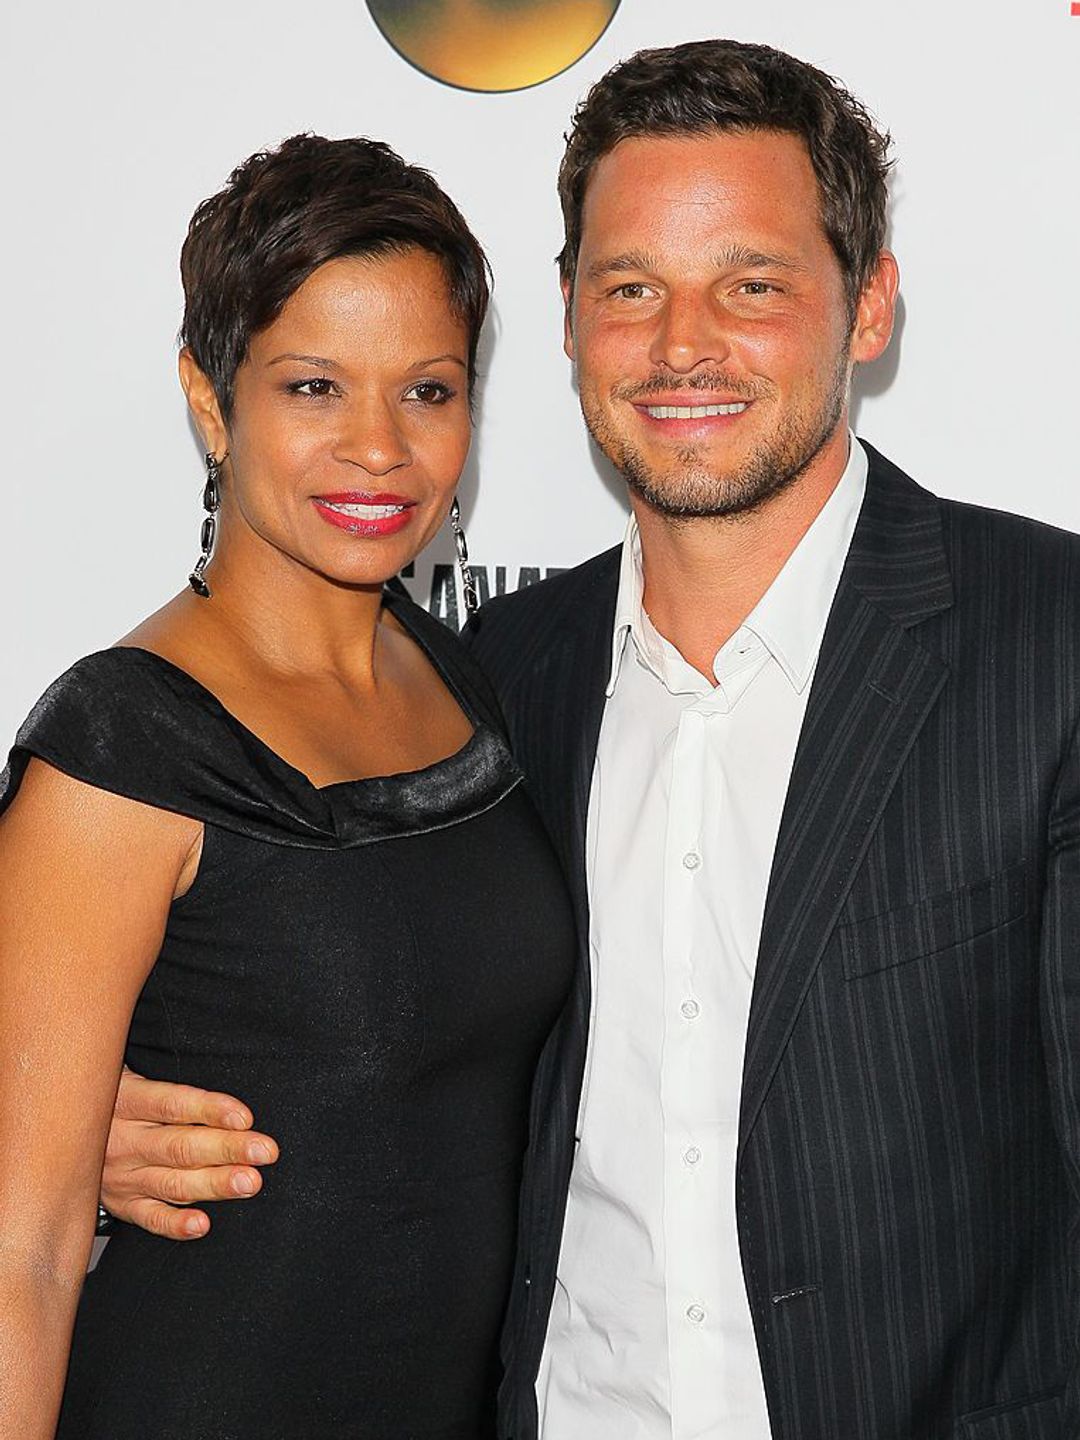 Justin and Keisha Chambers cuddle up for a photo on the red carpet